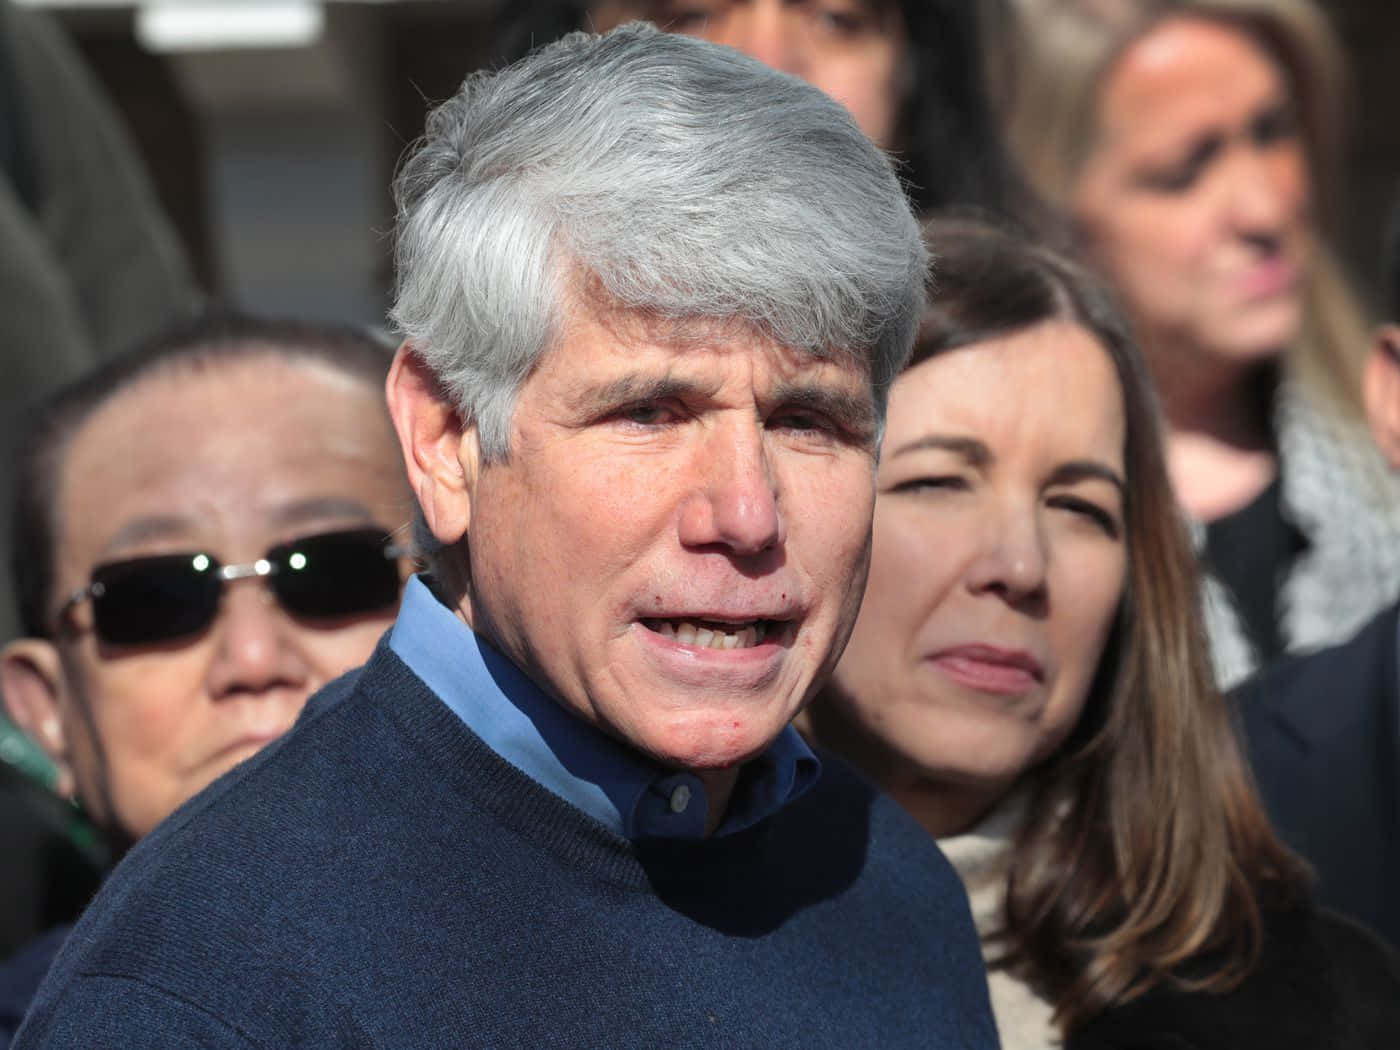 Former Illinois Governor Rod Blagojevich with his wife Patti at a public conference Wallpaper